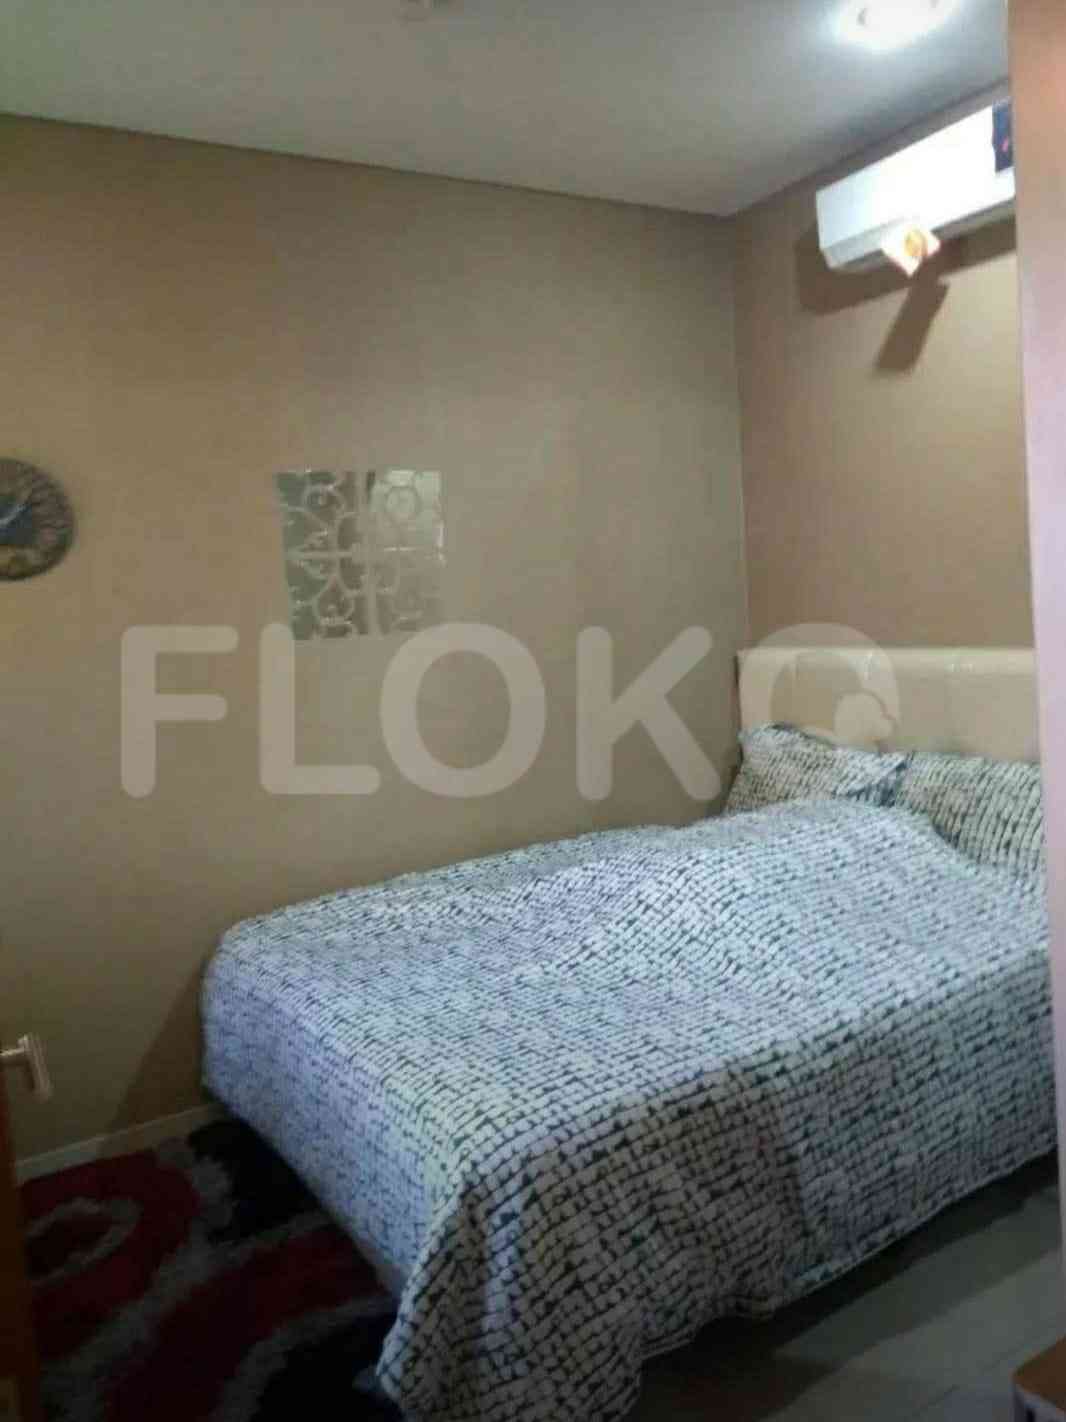 2 Bedroom on nullth Floor for Rent in Kuningan Place Apartment - fku453 1